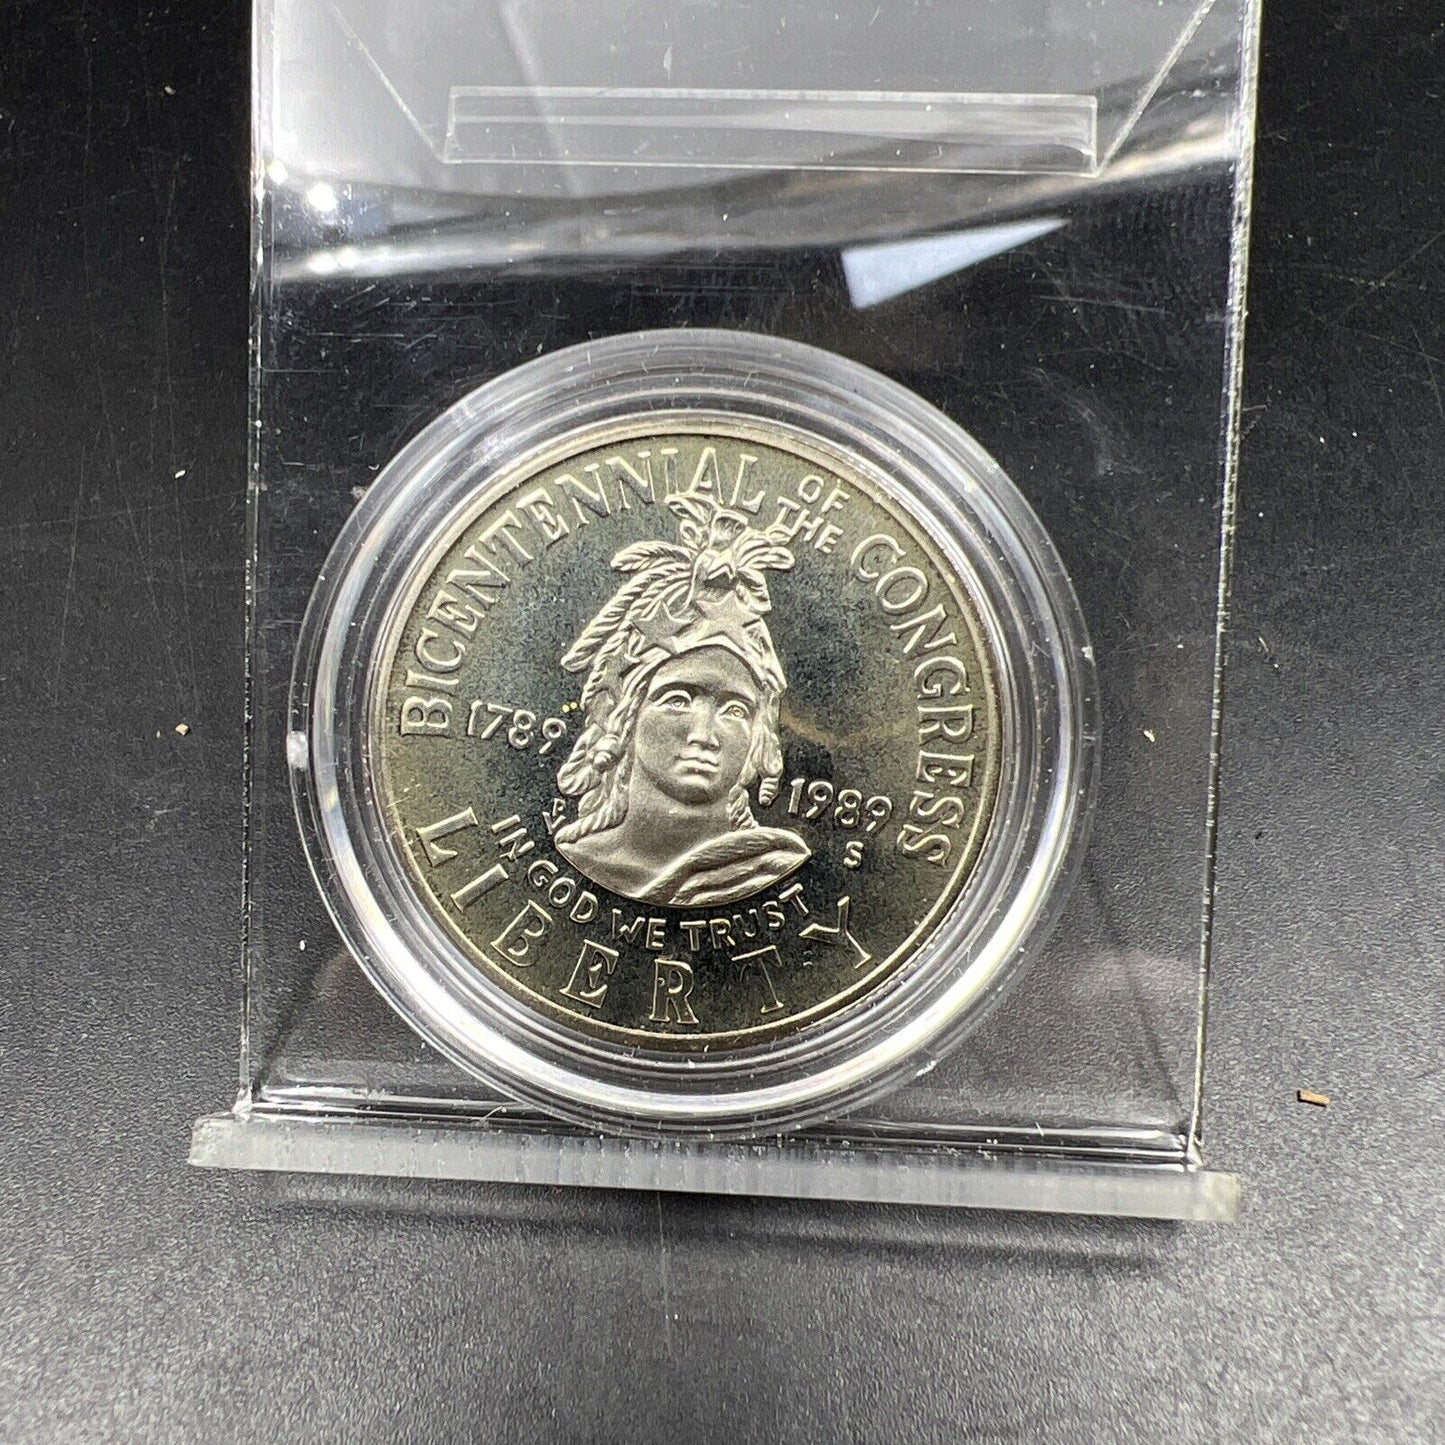 1989 S Library of Congress Commemorative Half Dollar Coin in Capsule UNC Proof